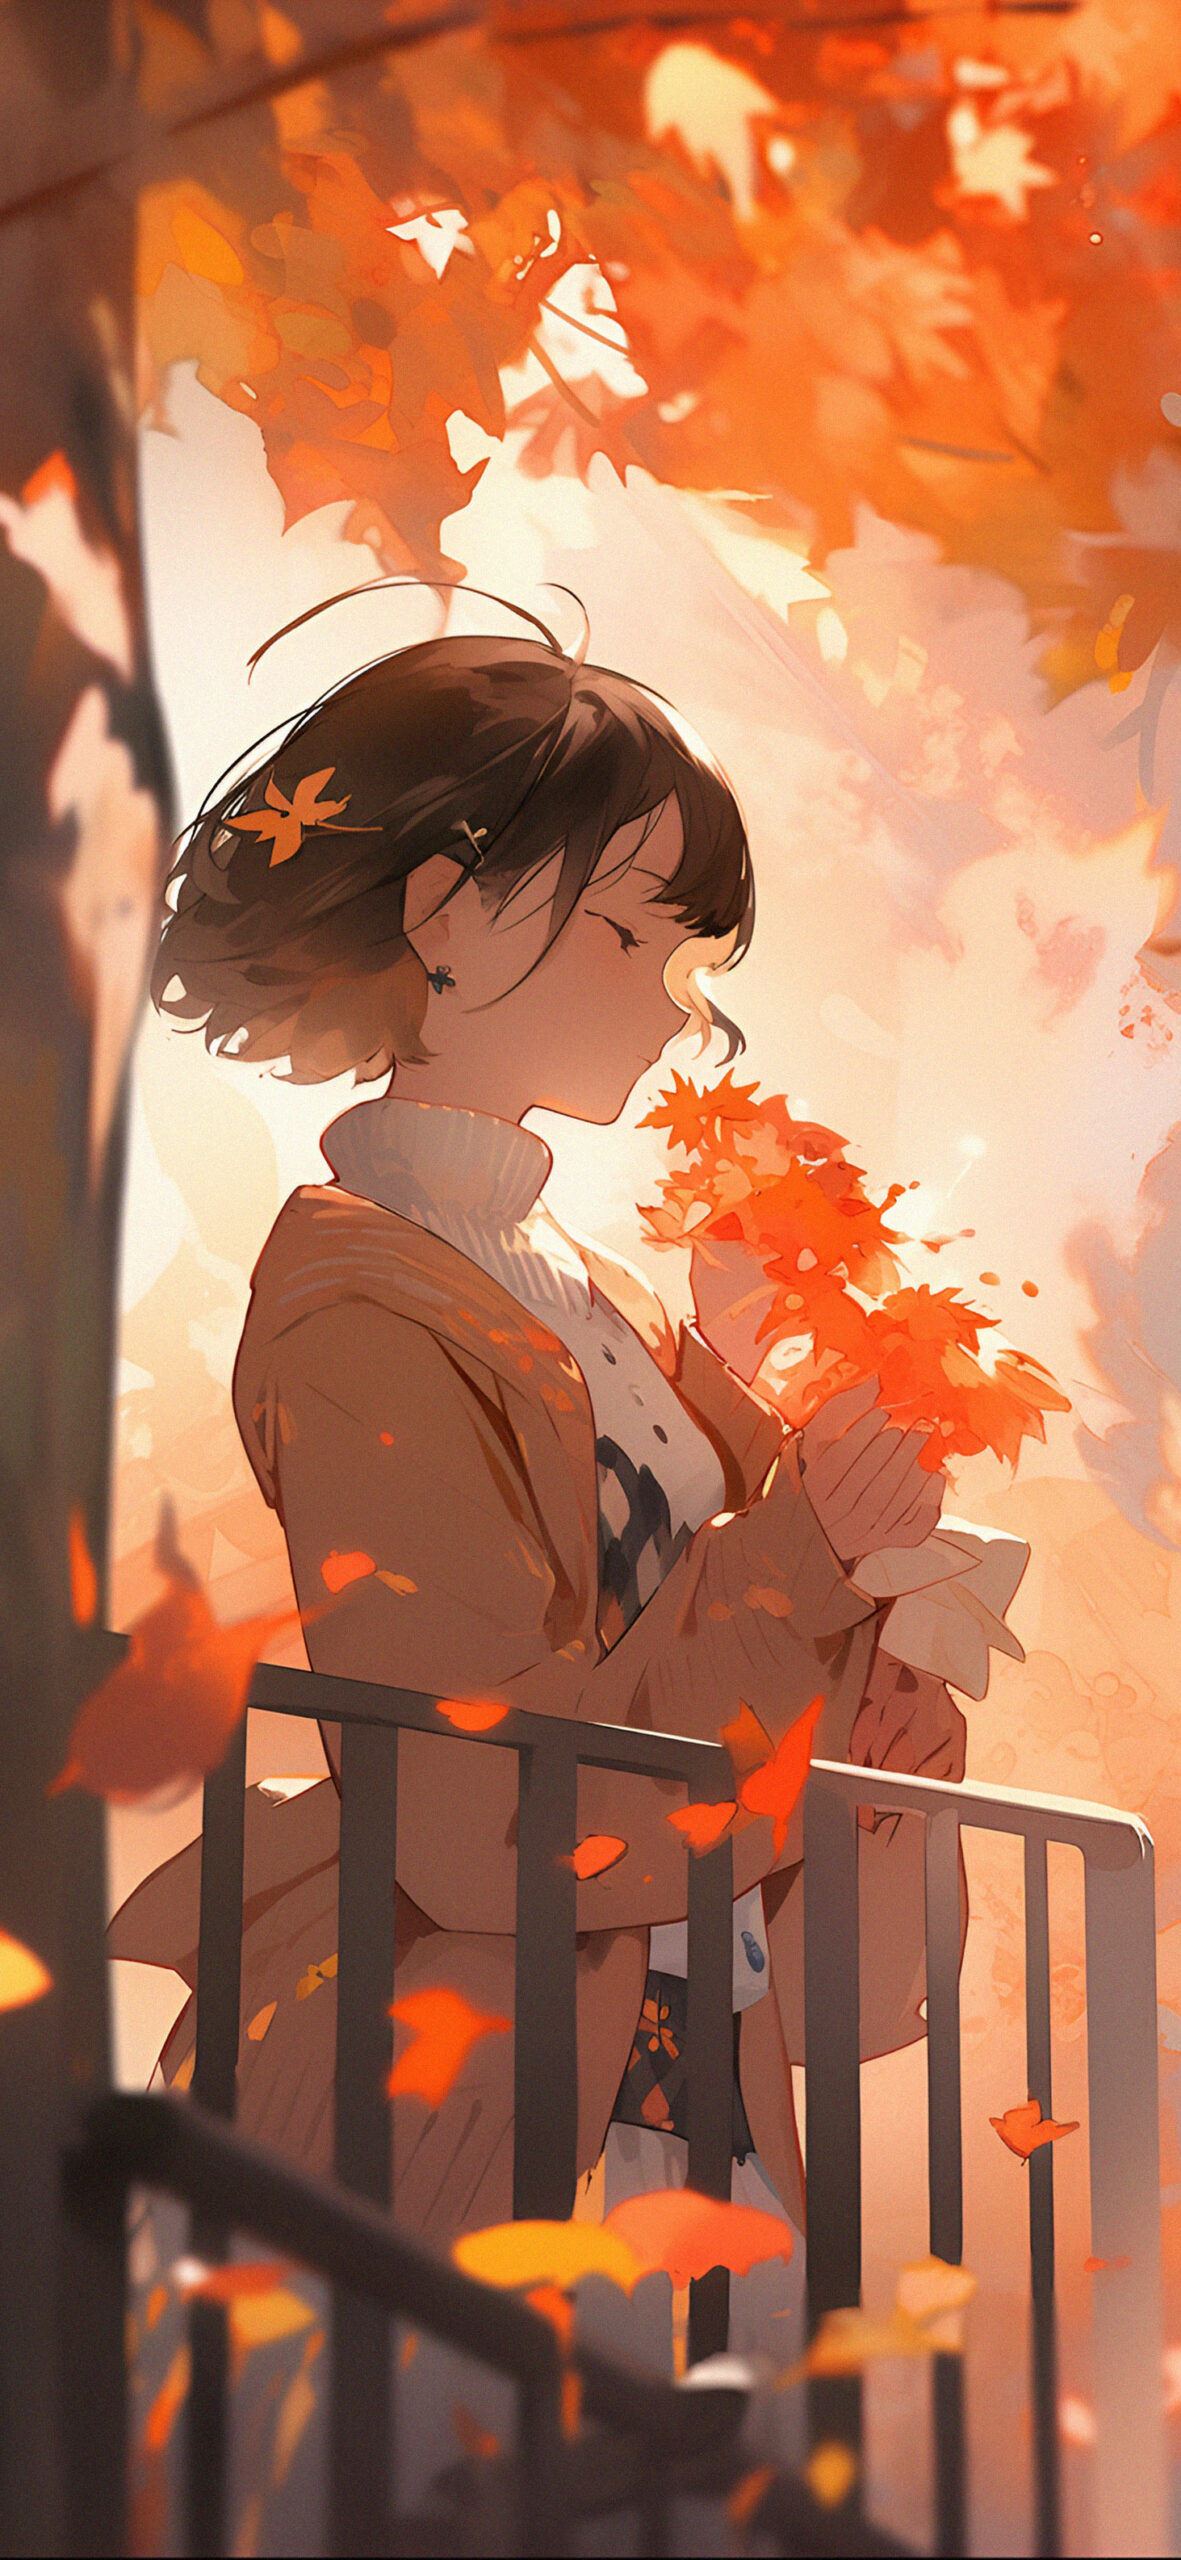 Autumn - Anime Point Wallpapers and Images - Desktop Nexus Groups